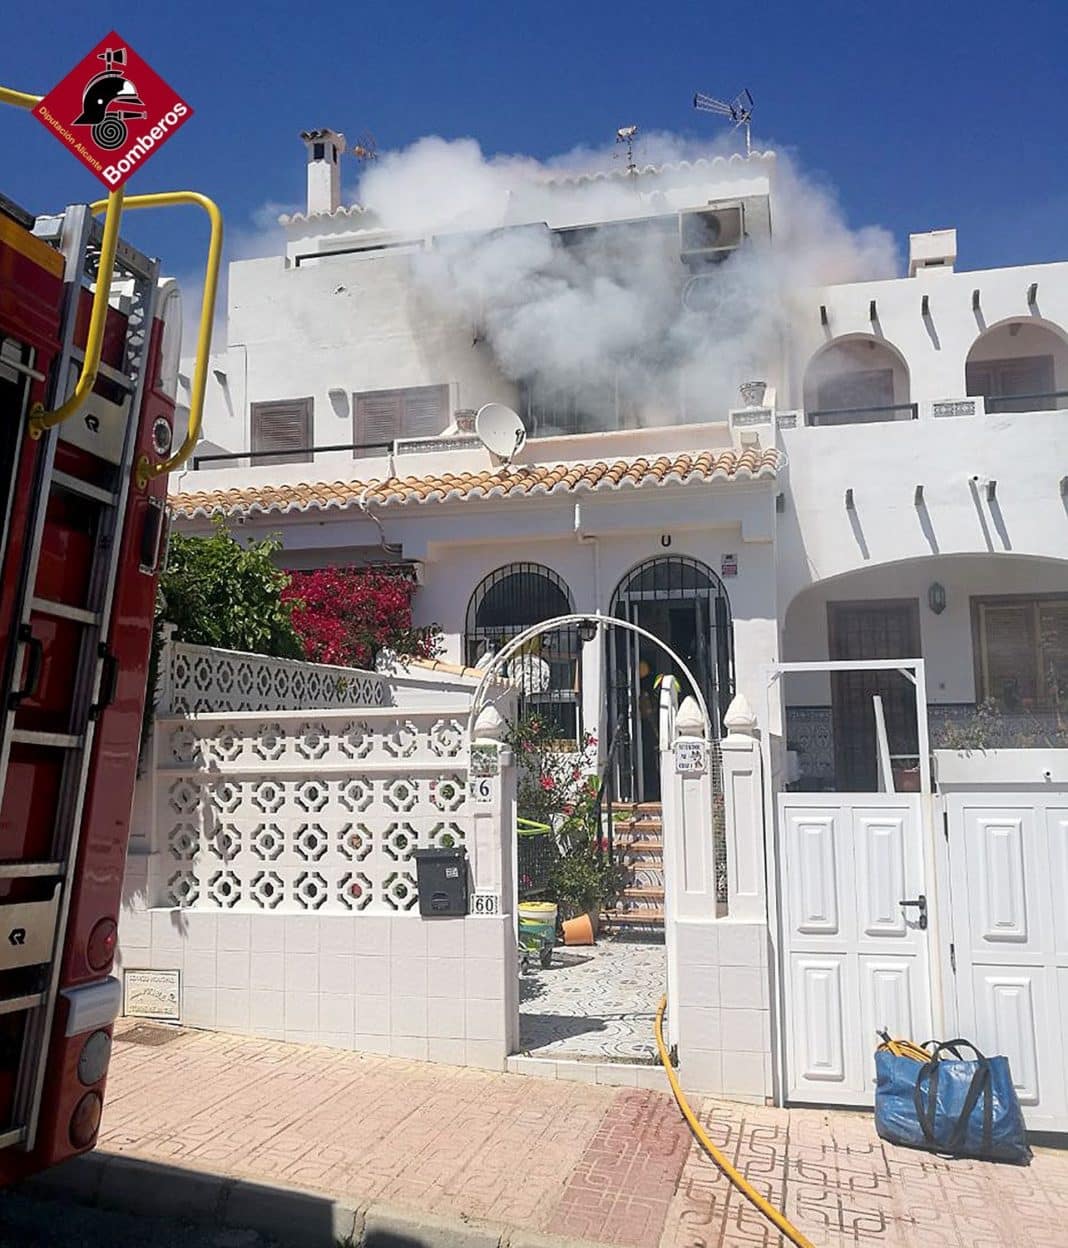 A spectacular fire occurred in a home on Avenida de Torreblanca in Torrevieja on Thursday afternoon